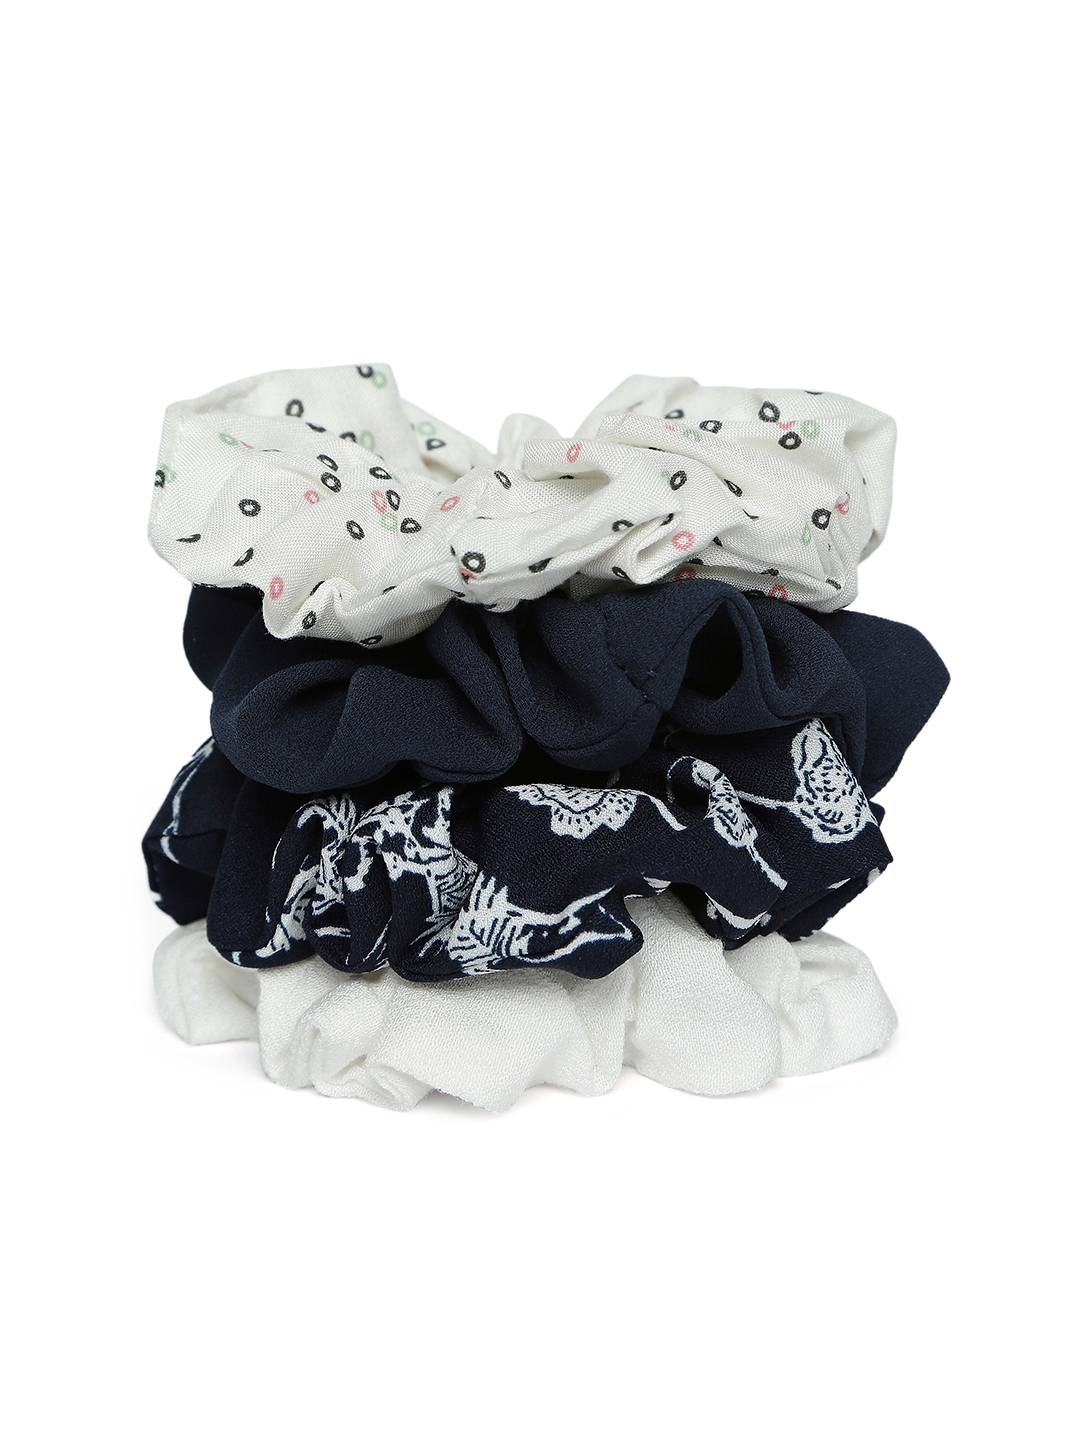 Lilly & Sparkle Navy Blue And White Scrunchies Set Of 4